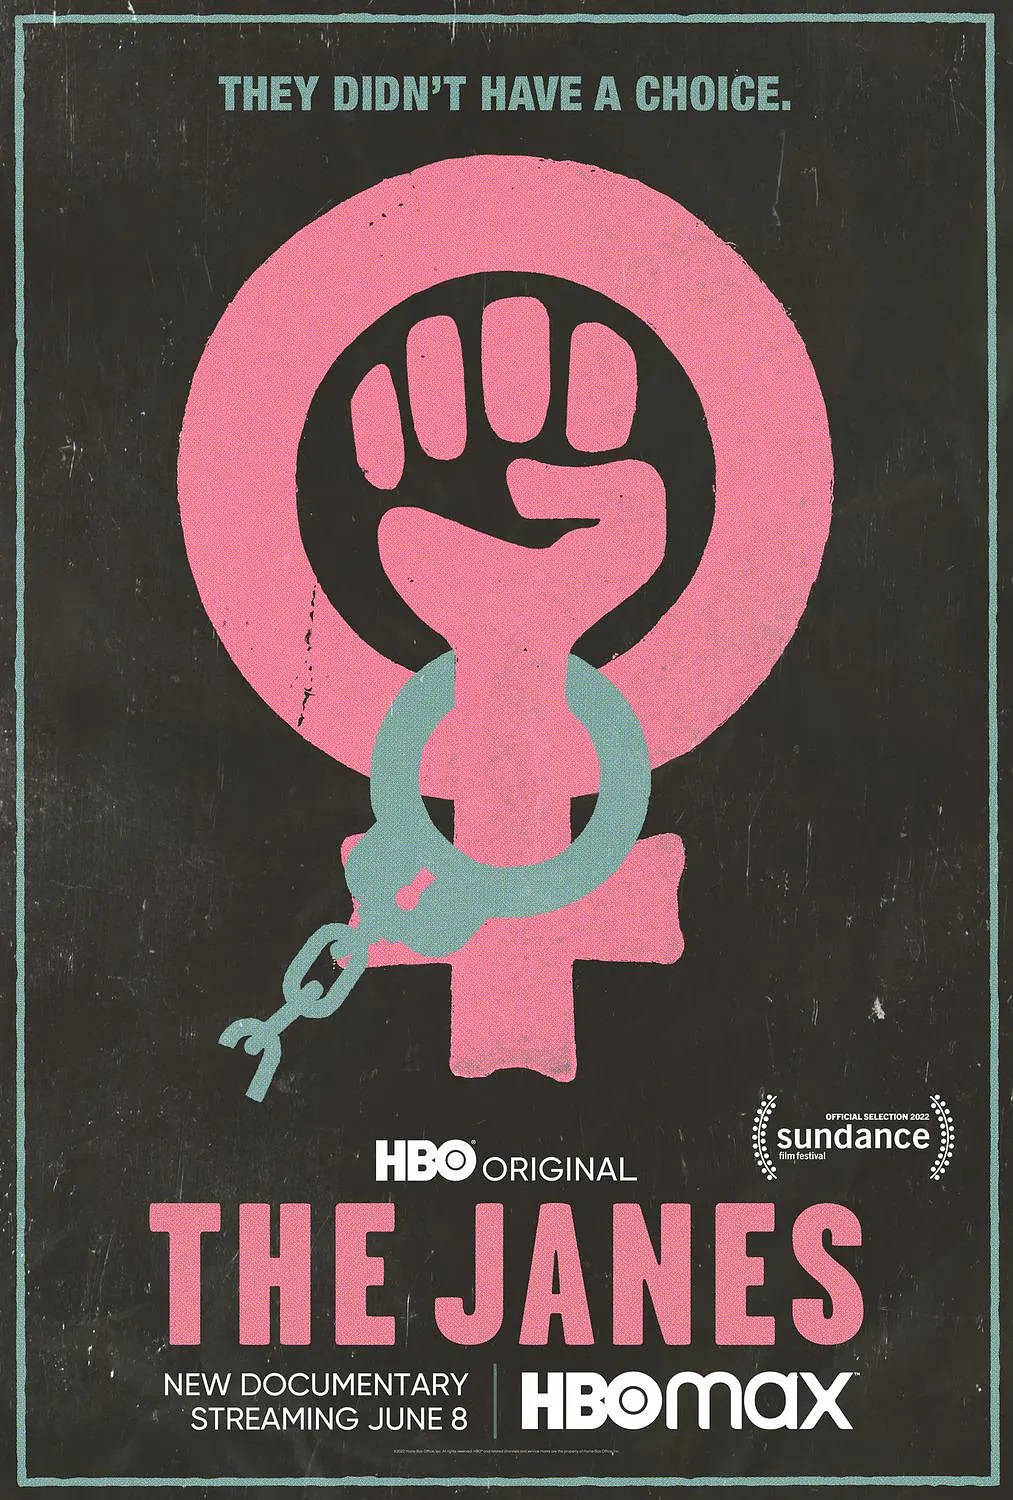  hbo-max-movies-The-JaneS  